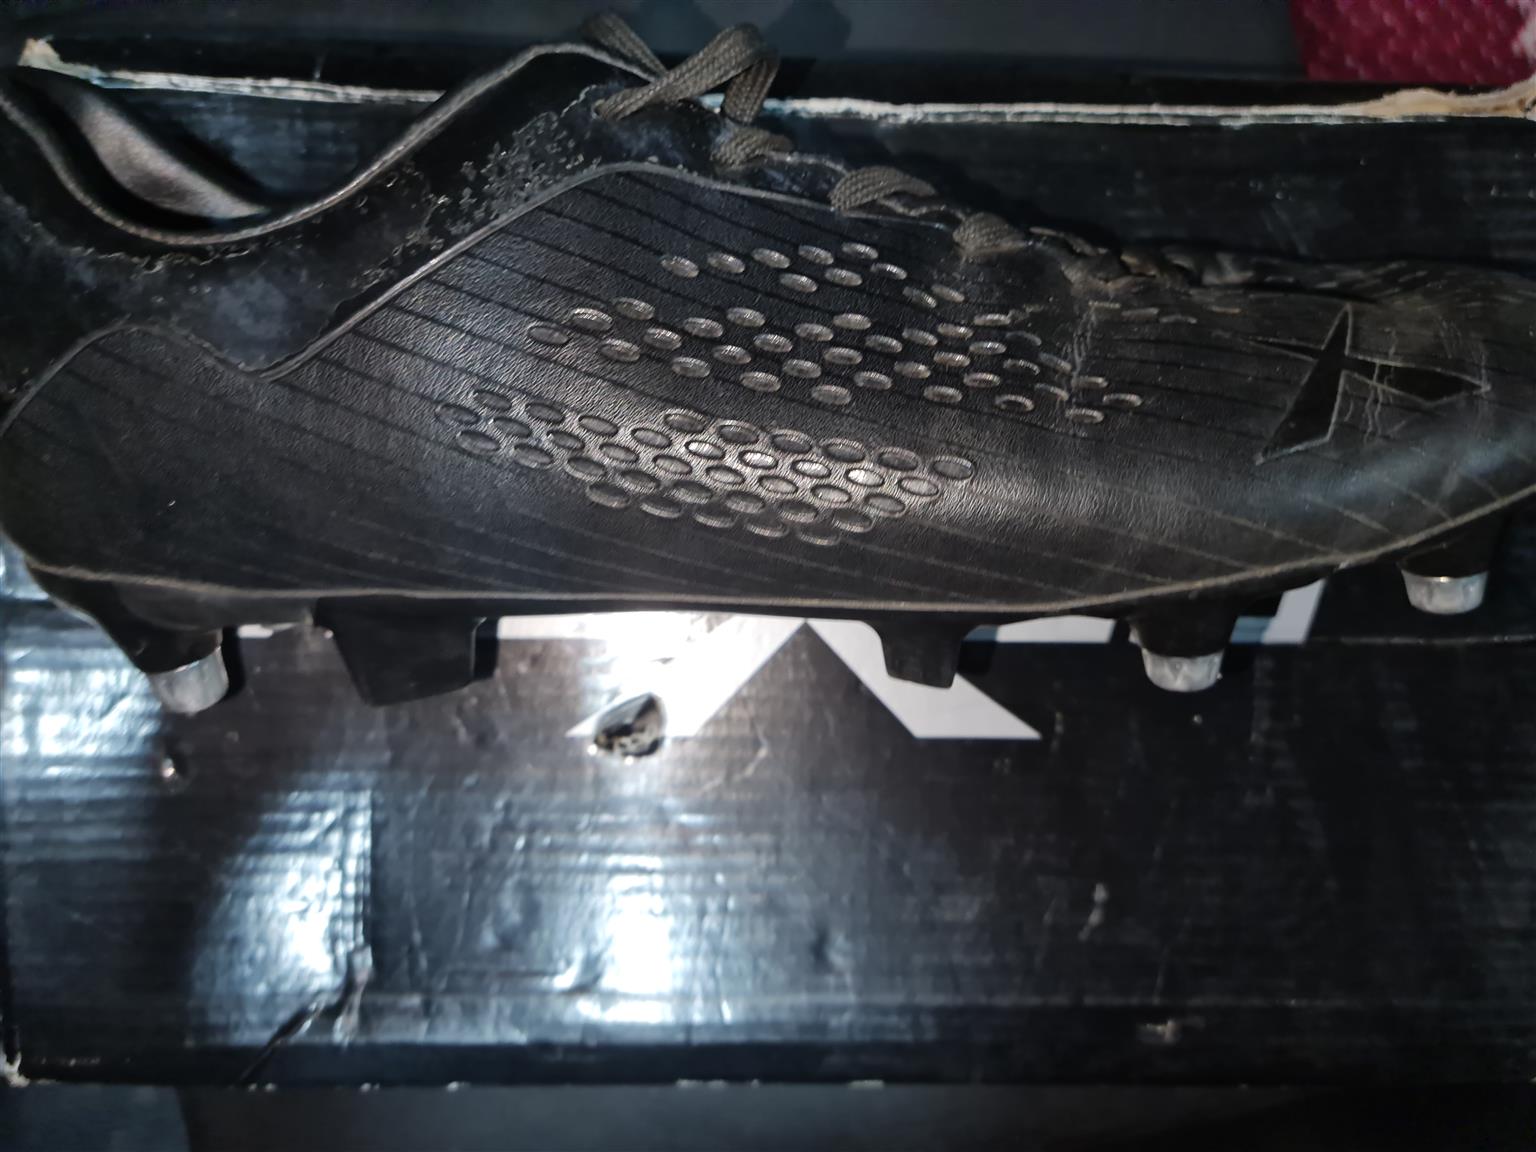 Rugby boot size 8